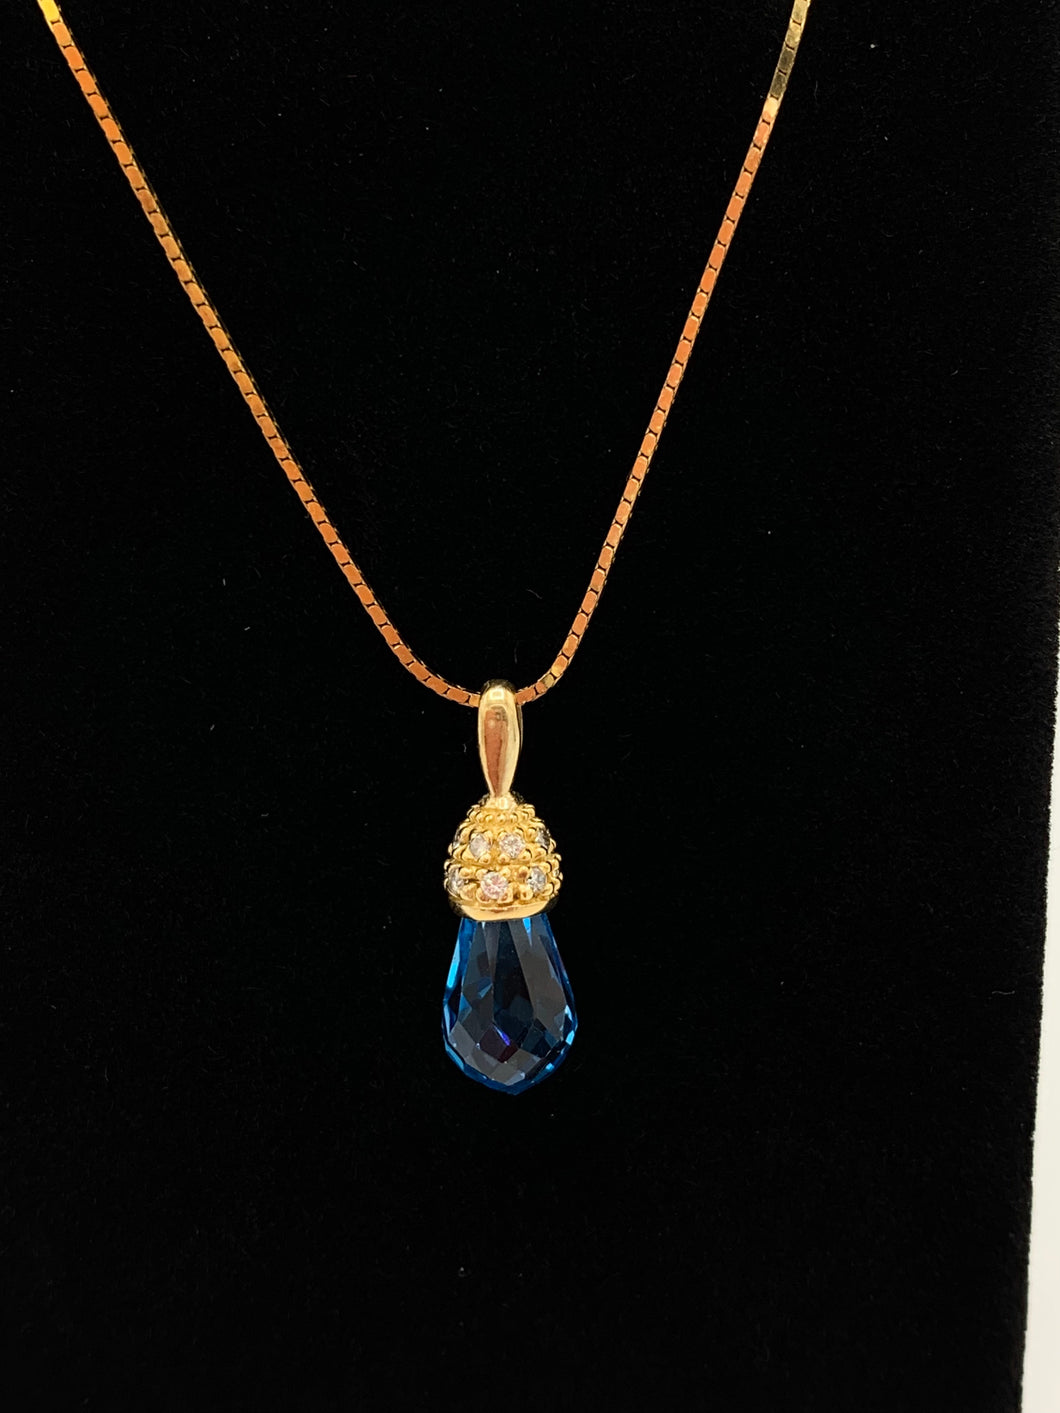 14K Yellow Gold Blue Topaz and Diamond Necklace